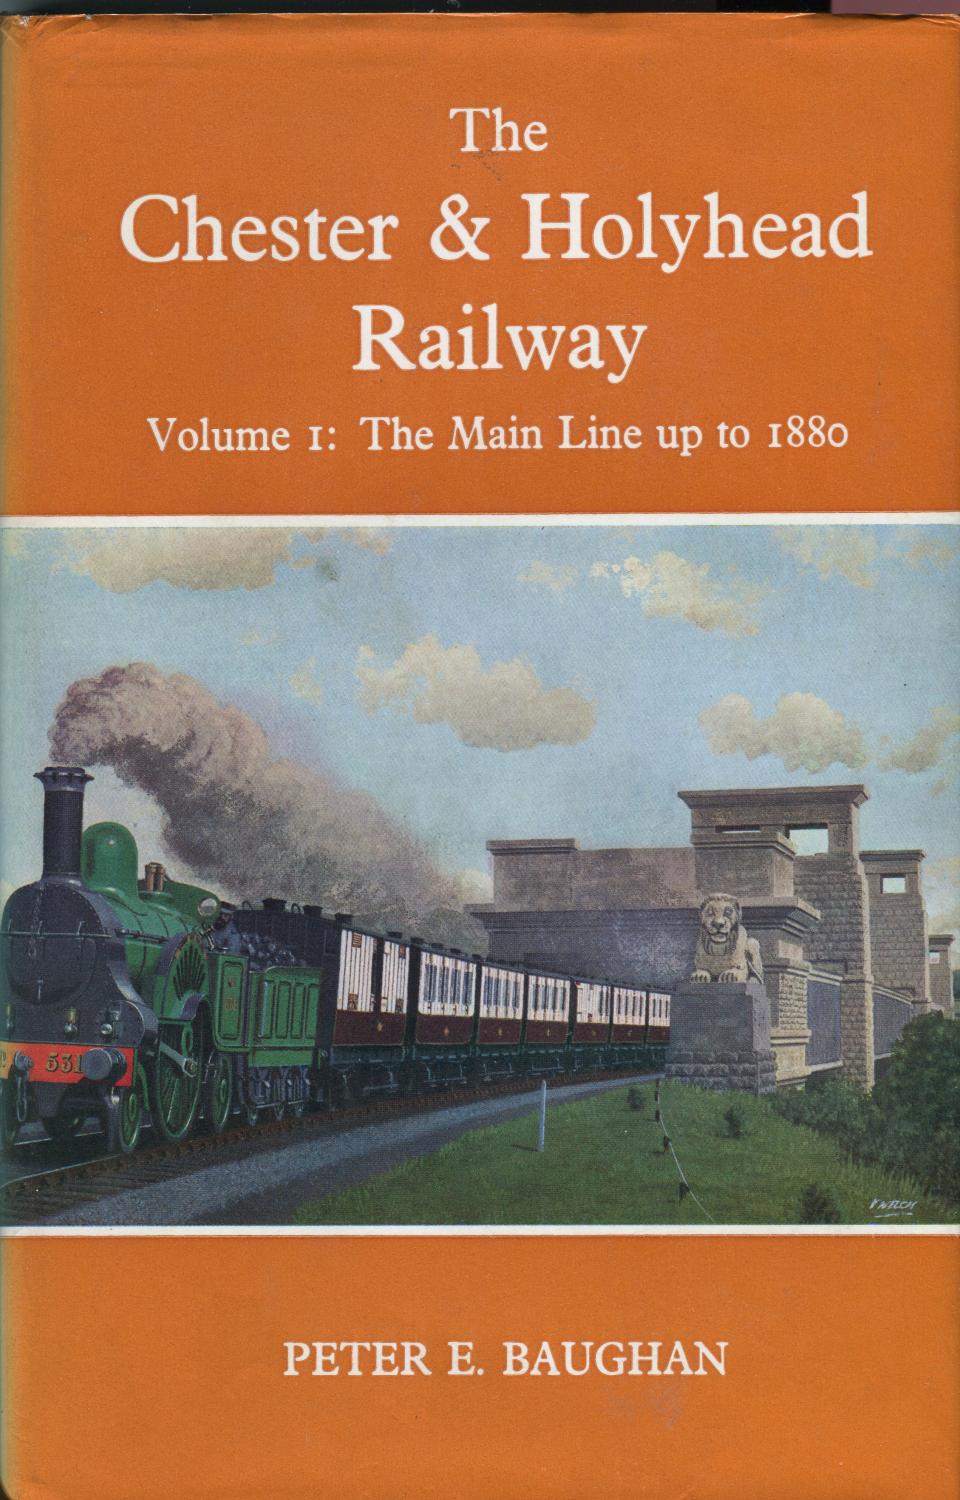 The Chester & Holyhead Railway Volume One, The Main Line up to 1880 - BAUGHAN, PETER E.